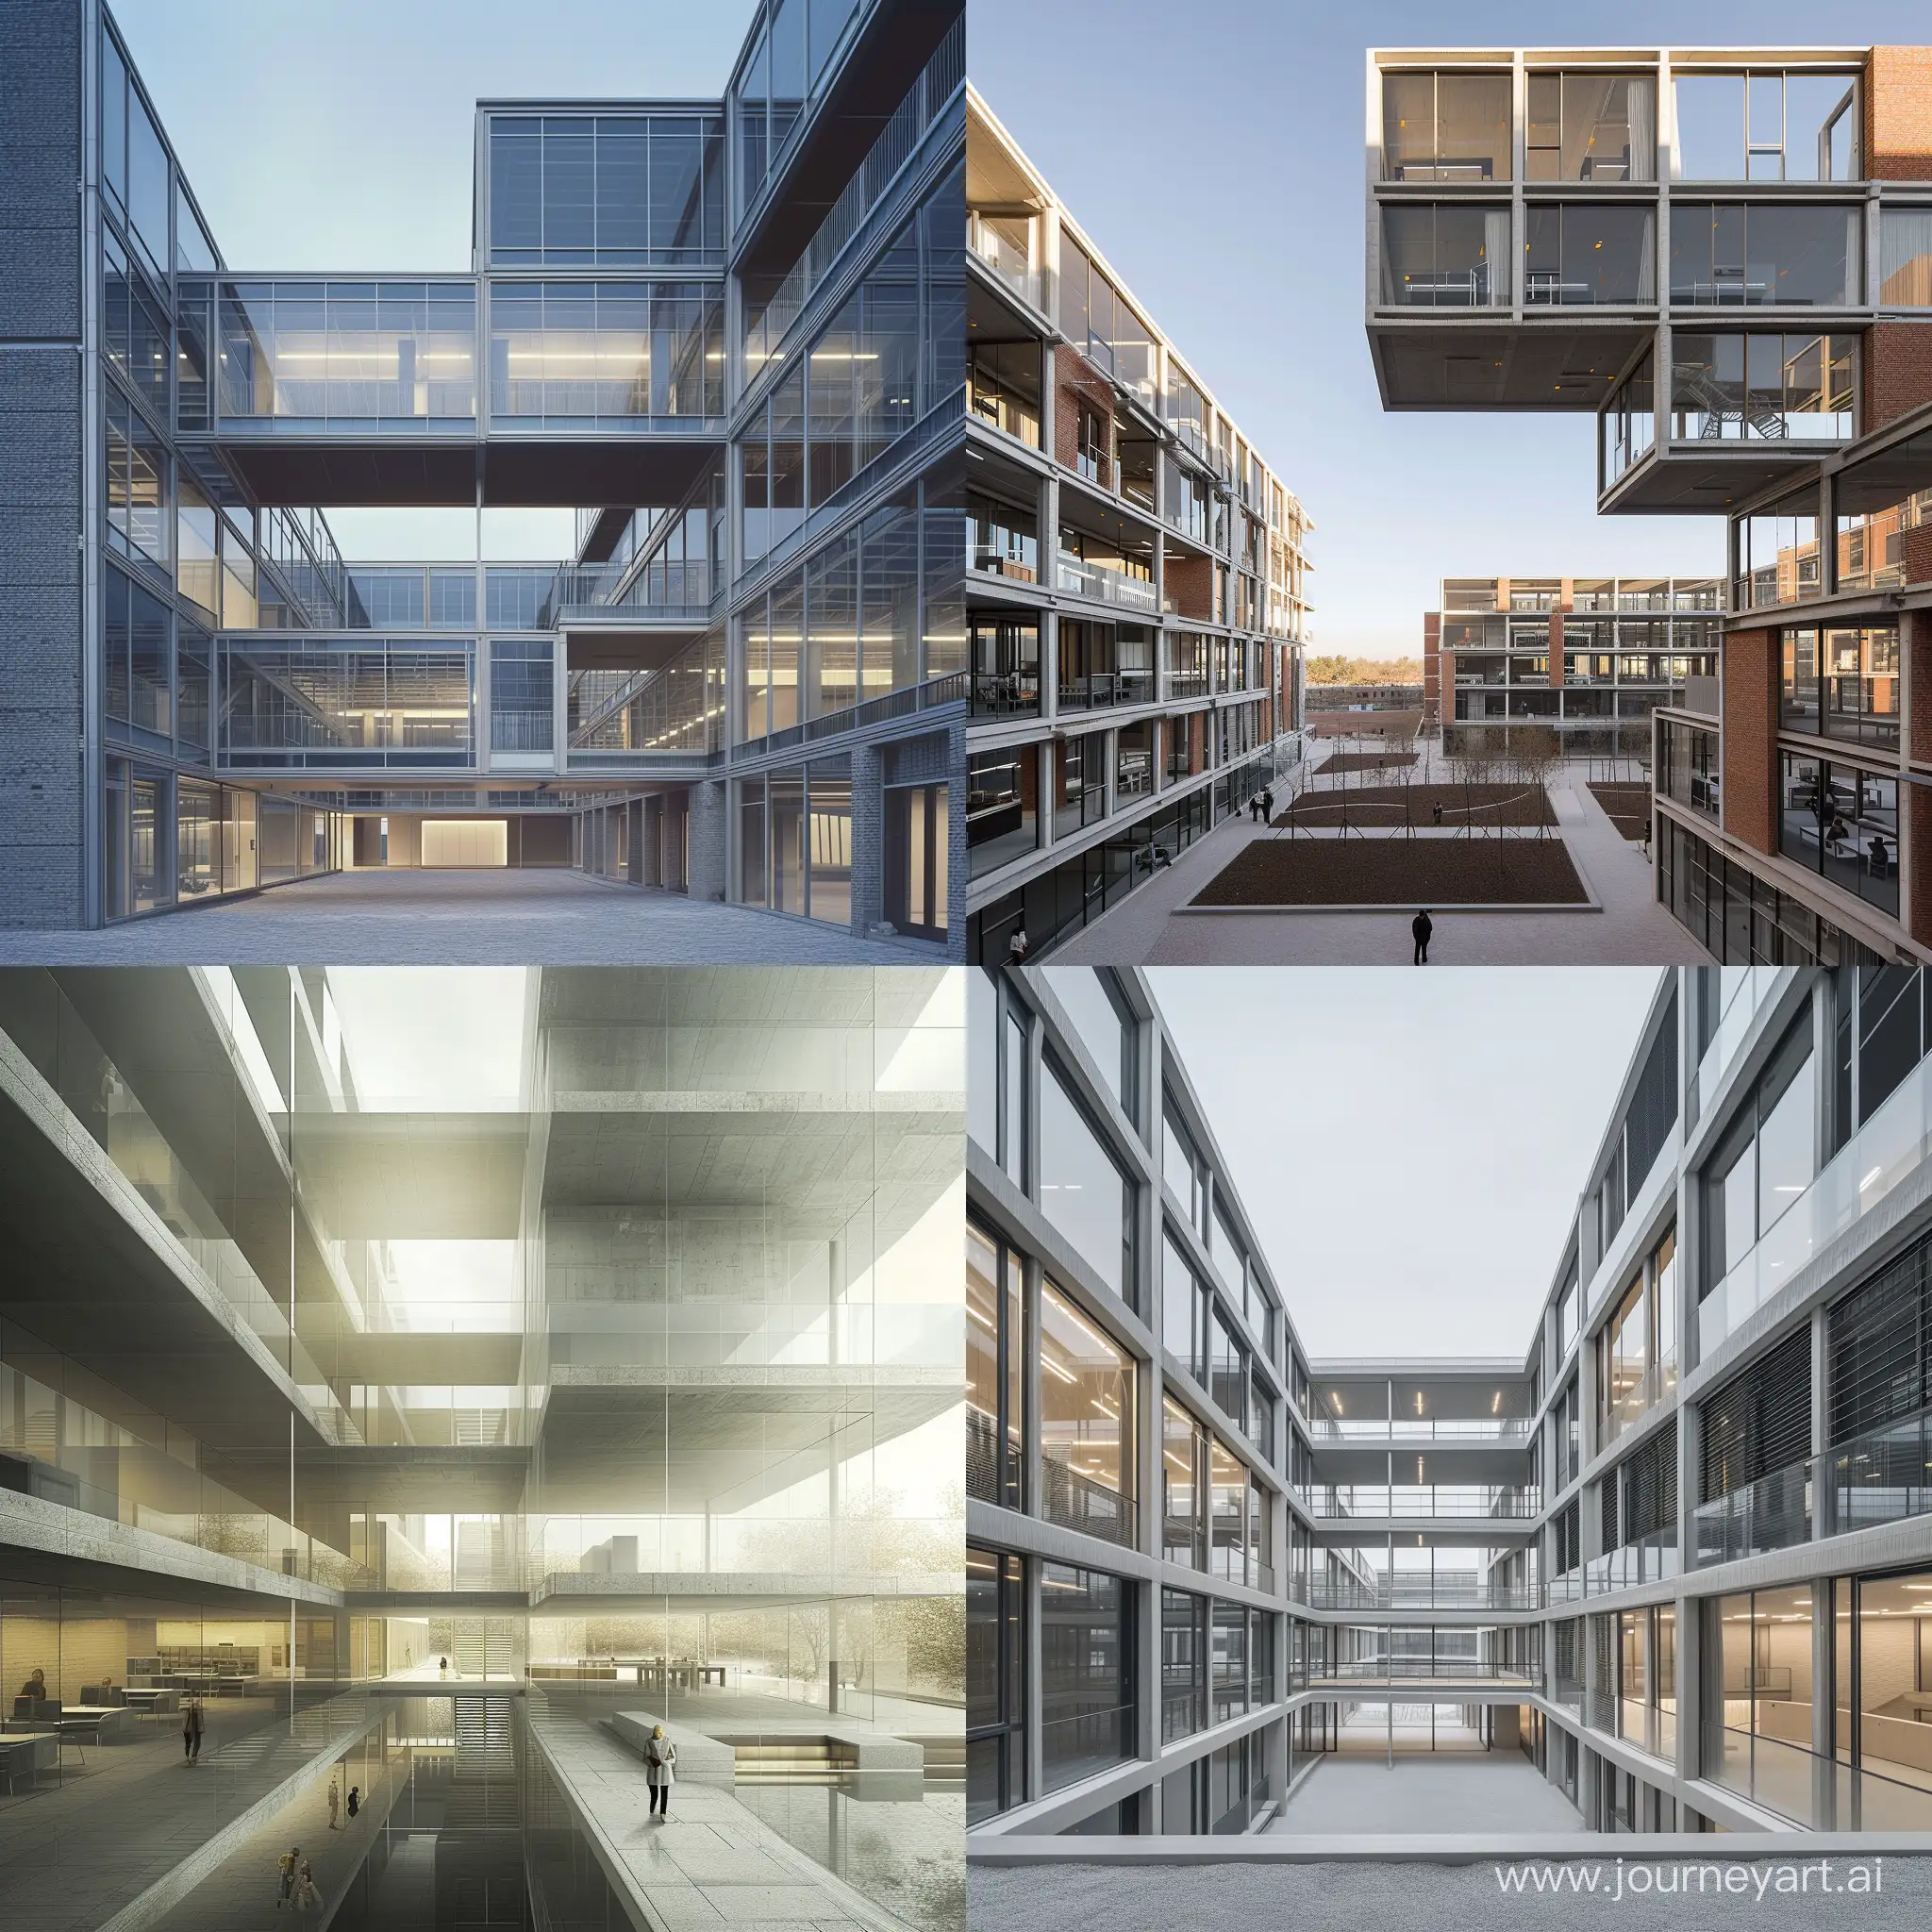 imagine a instutucional building contest architecture, 8 floors,exterior,perspective,Photographed by Iwan Baan,clean lines, open spaces, and the use of glass,steel, concrete,brick and steel.